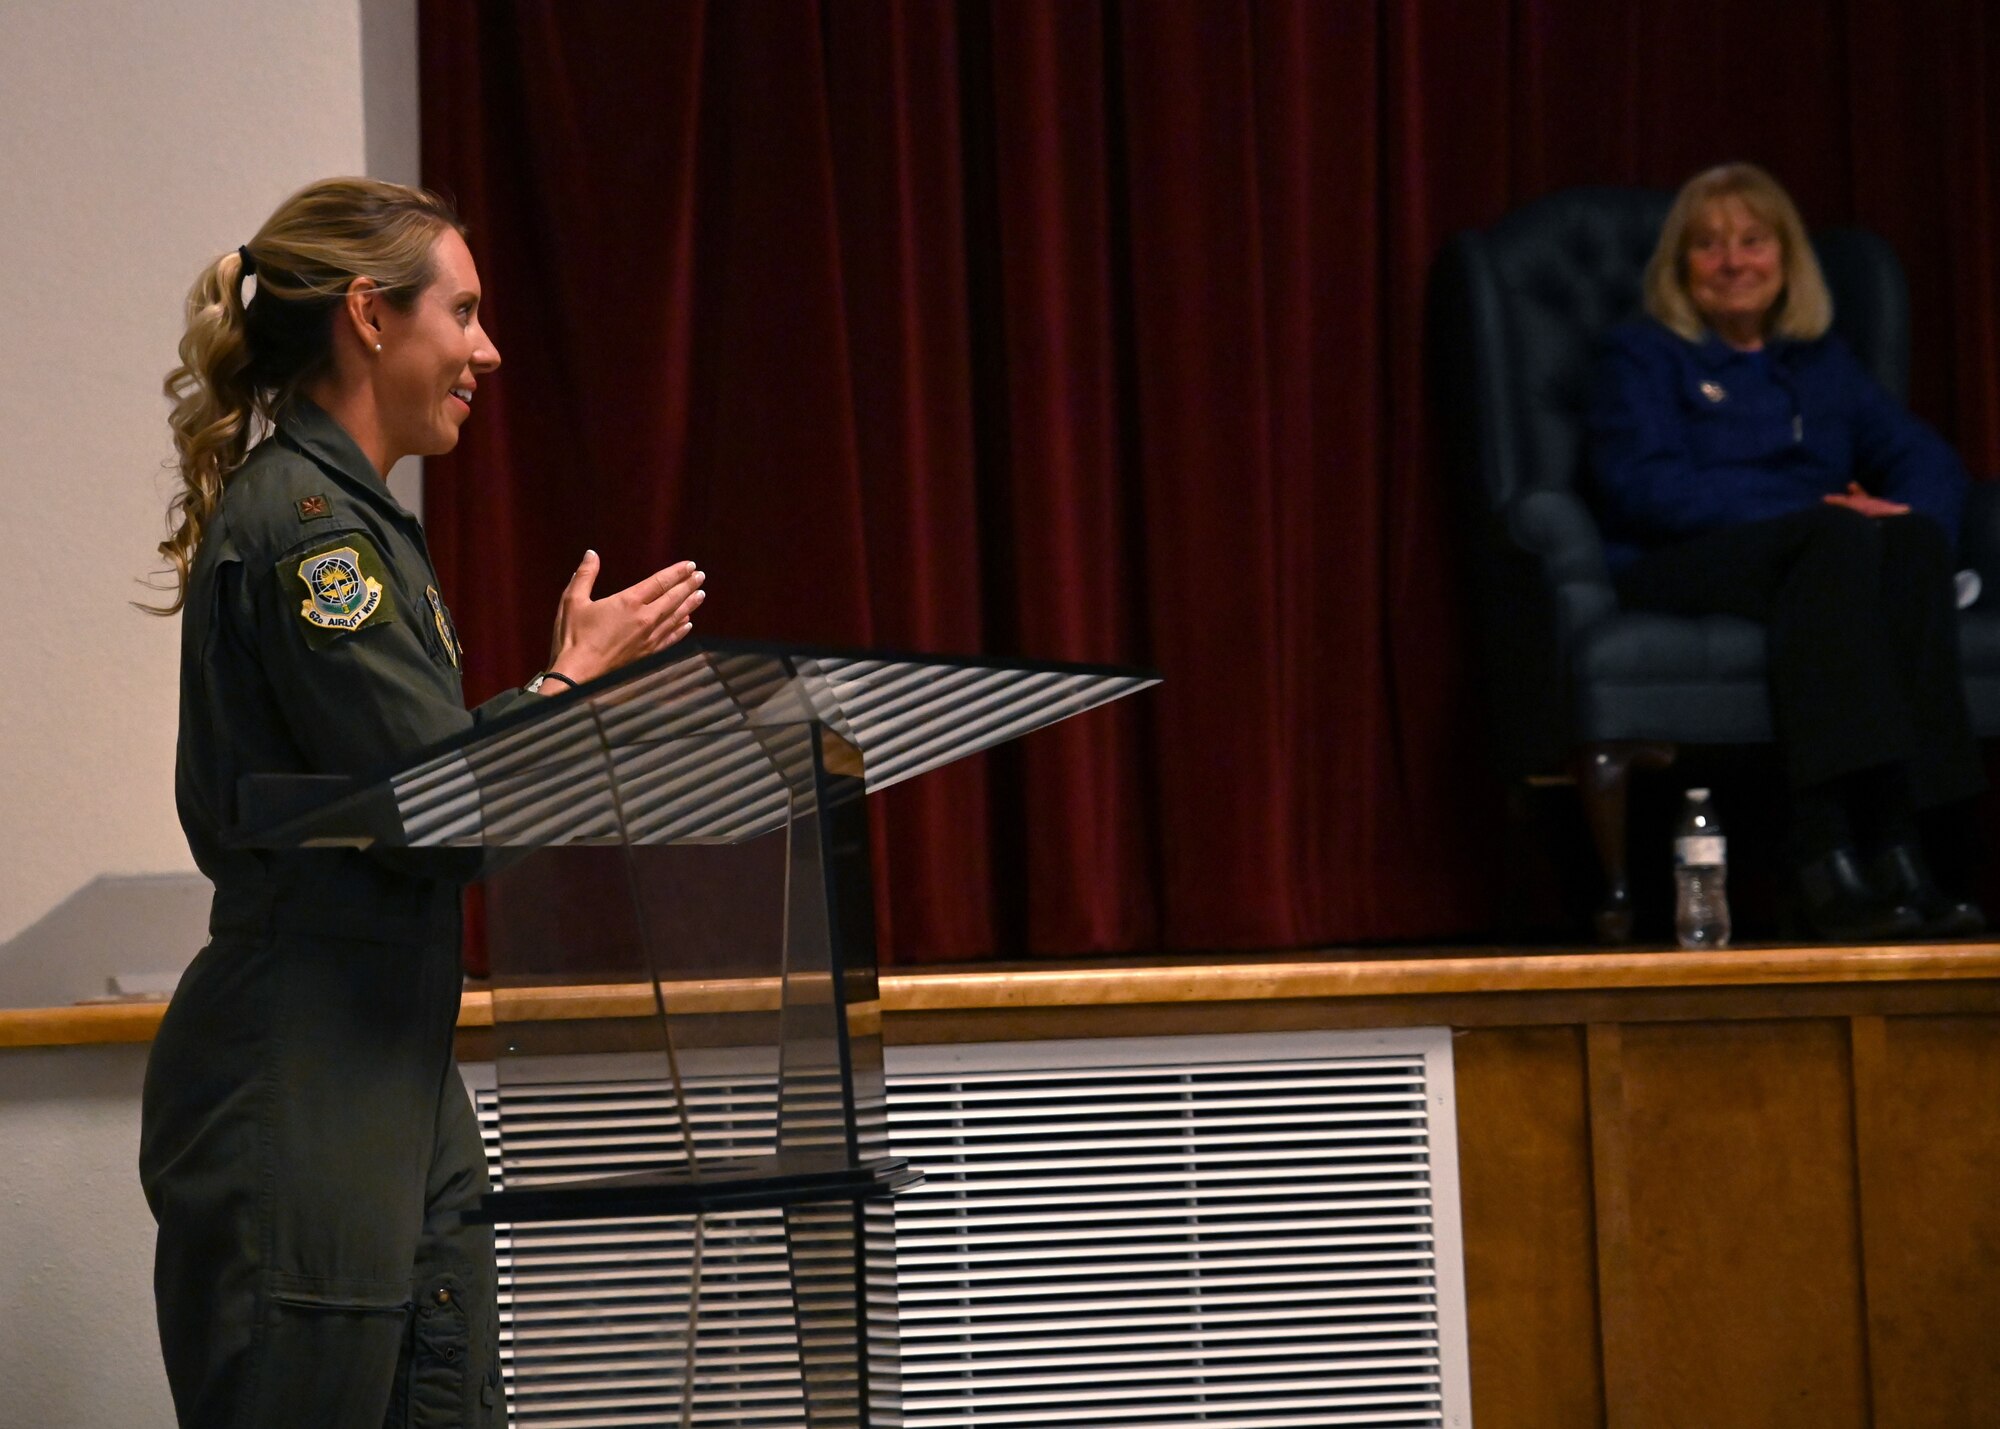 U.S. Air Force Maj. Courtney Vidt, pilot and chief of the commander’s action group with the 62nd Airlift Wing, shares her story on a Women in Aviation panel at Joint Base Lewis-McChord, Washington, March 28, 2022. The panel shared their personal experiences as women in a male-dominated career field in celebration of Women’s History Month. (U.S. Air Force photo by Airman 1st Class Callie Norton)